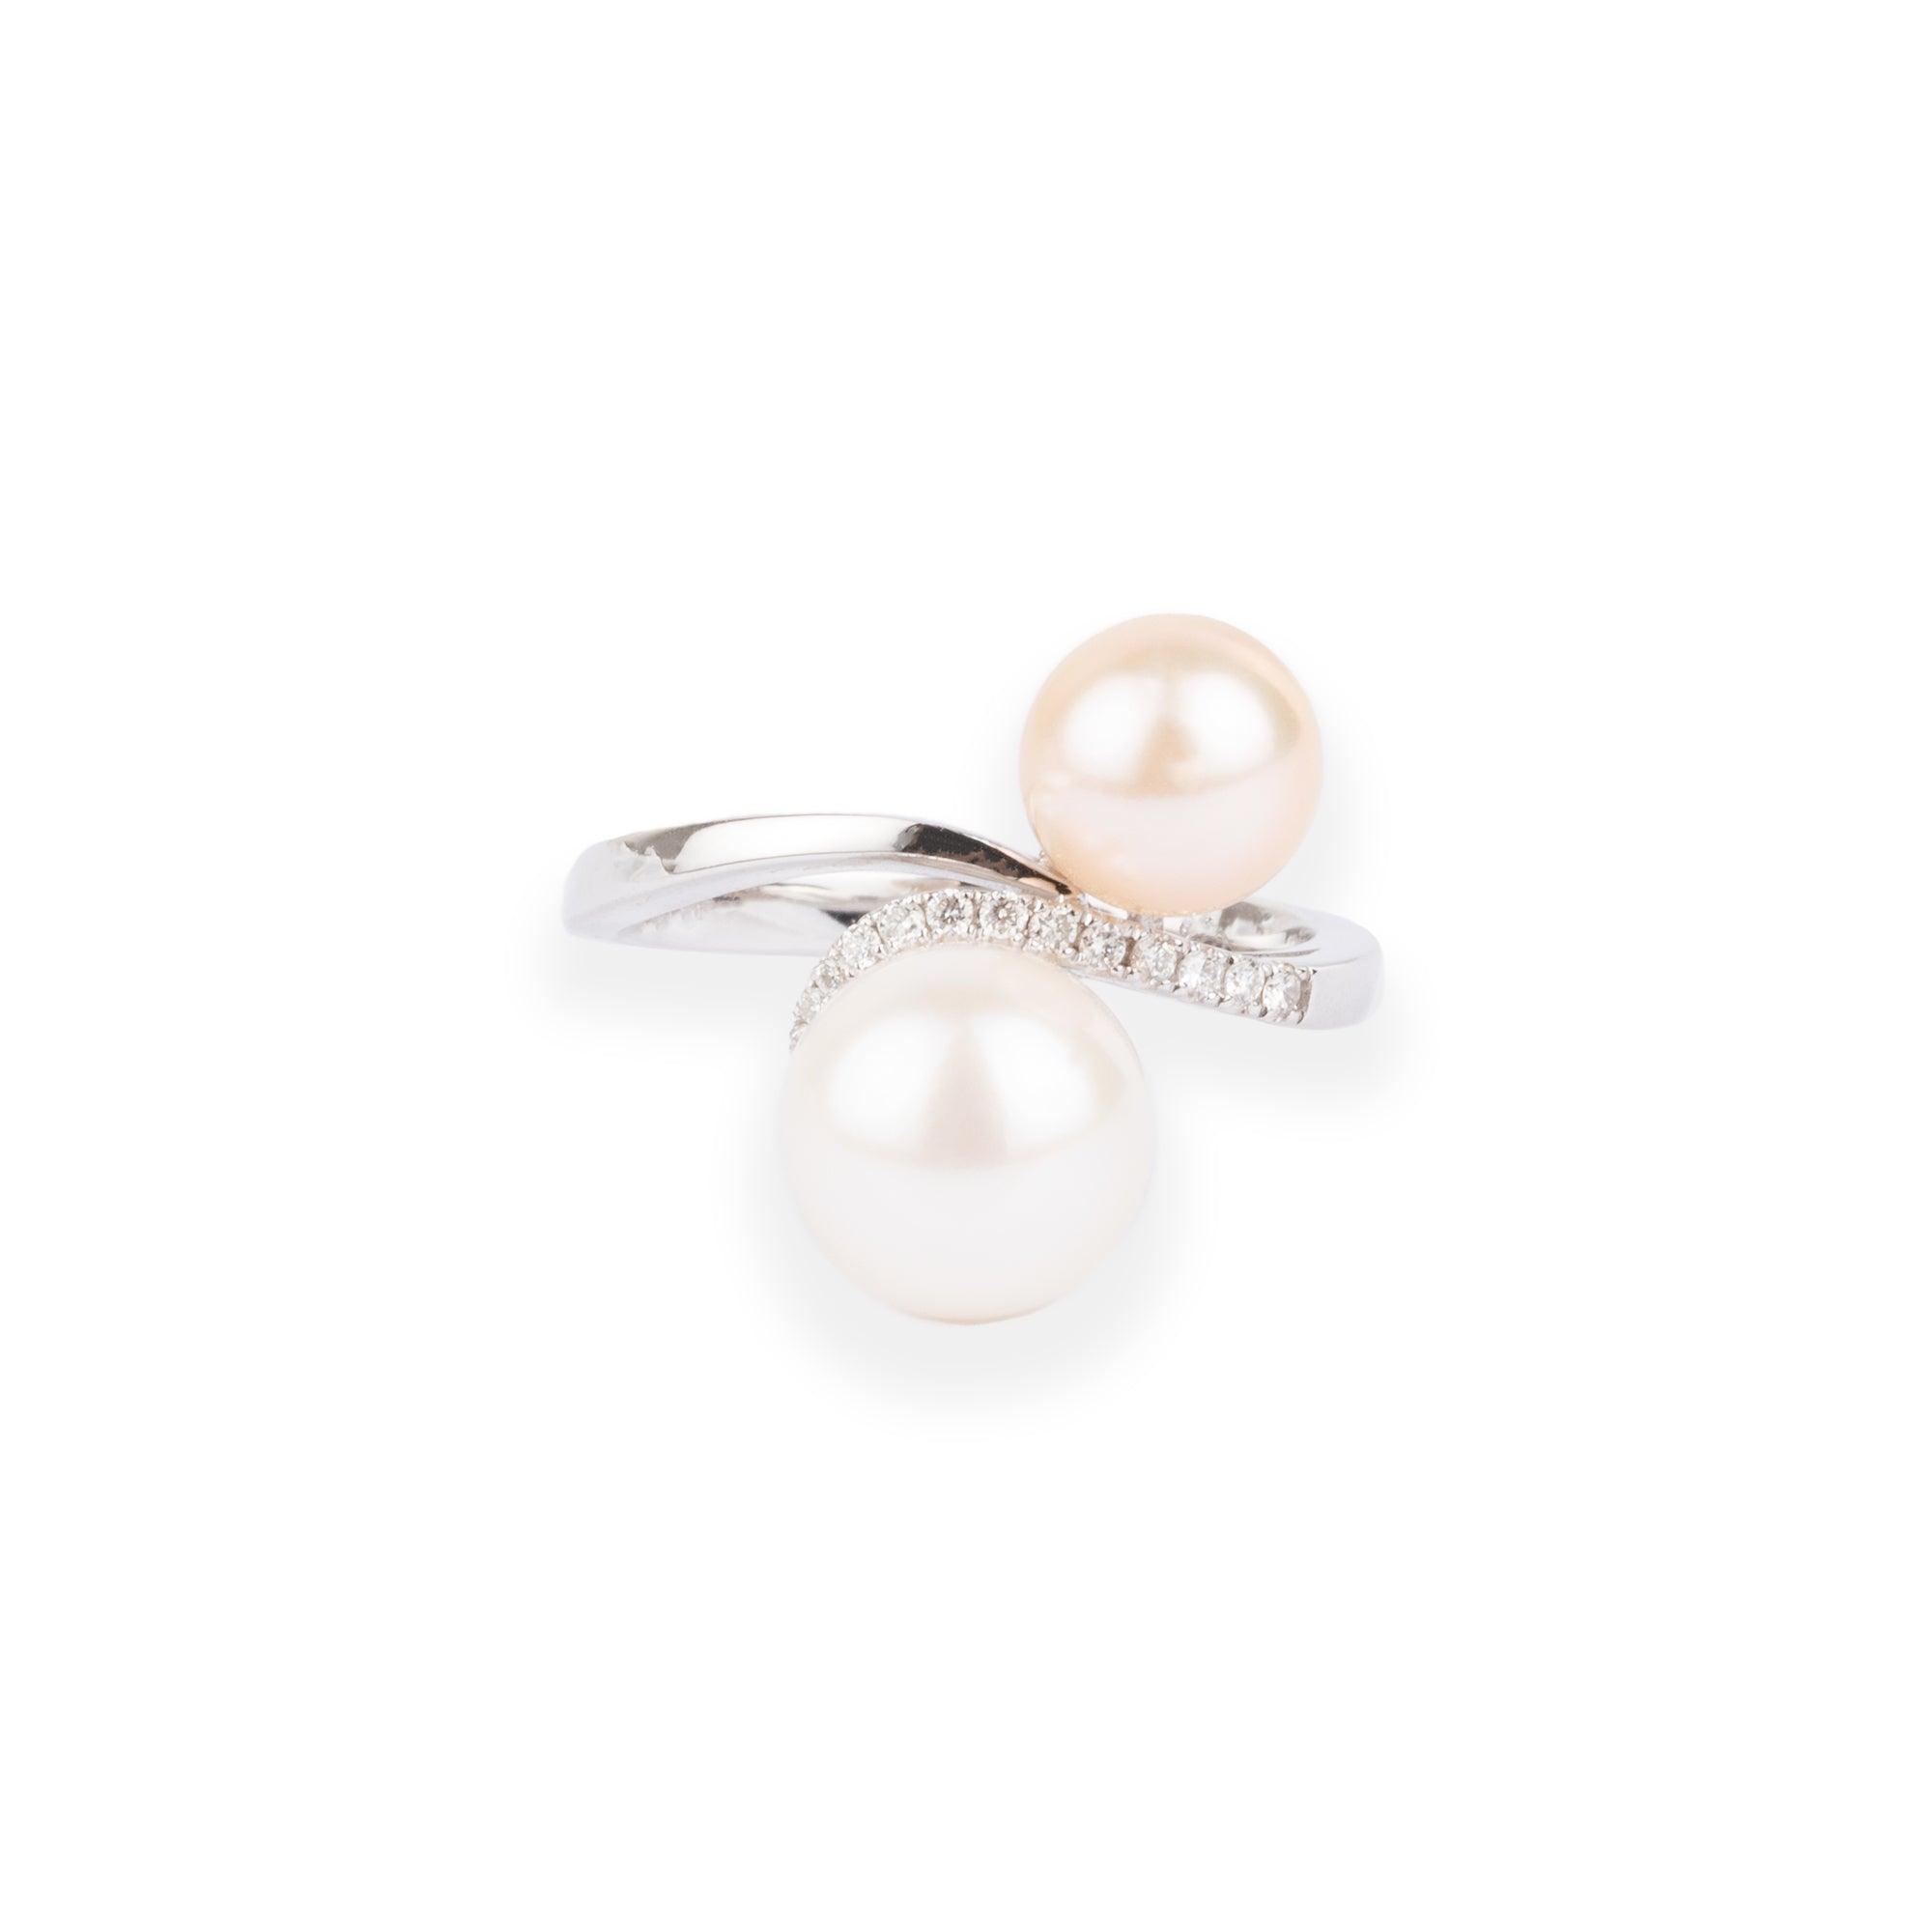 18ct White Gold Diamond & Cultured Pearl Dress Ring A-R31432-3013 - Minar Jewellers